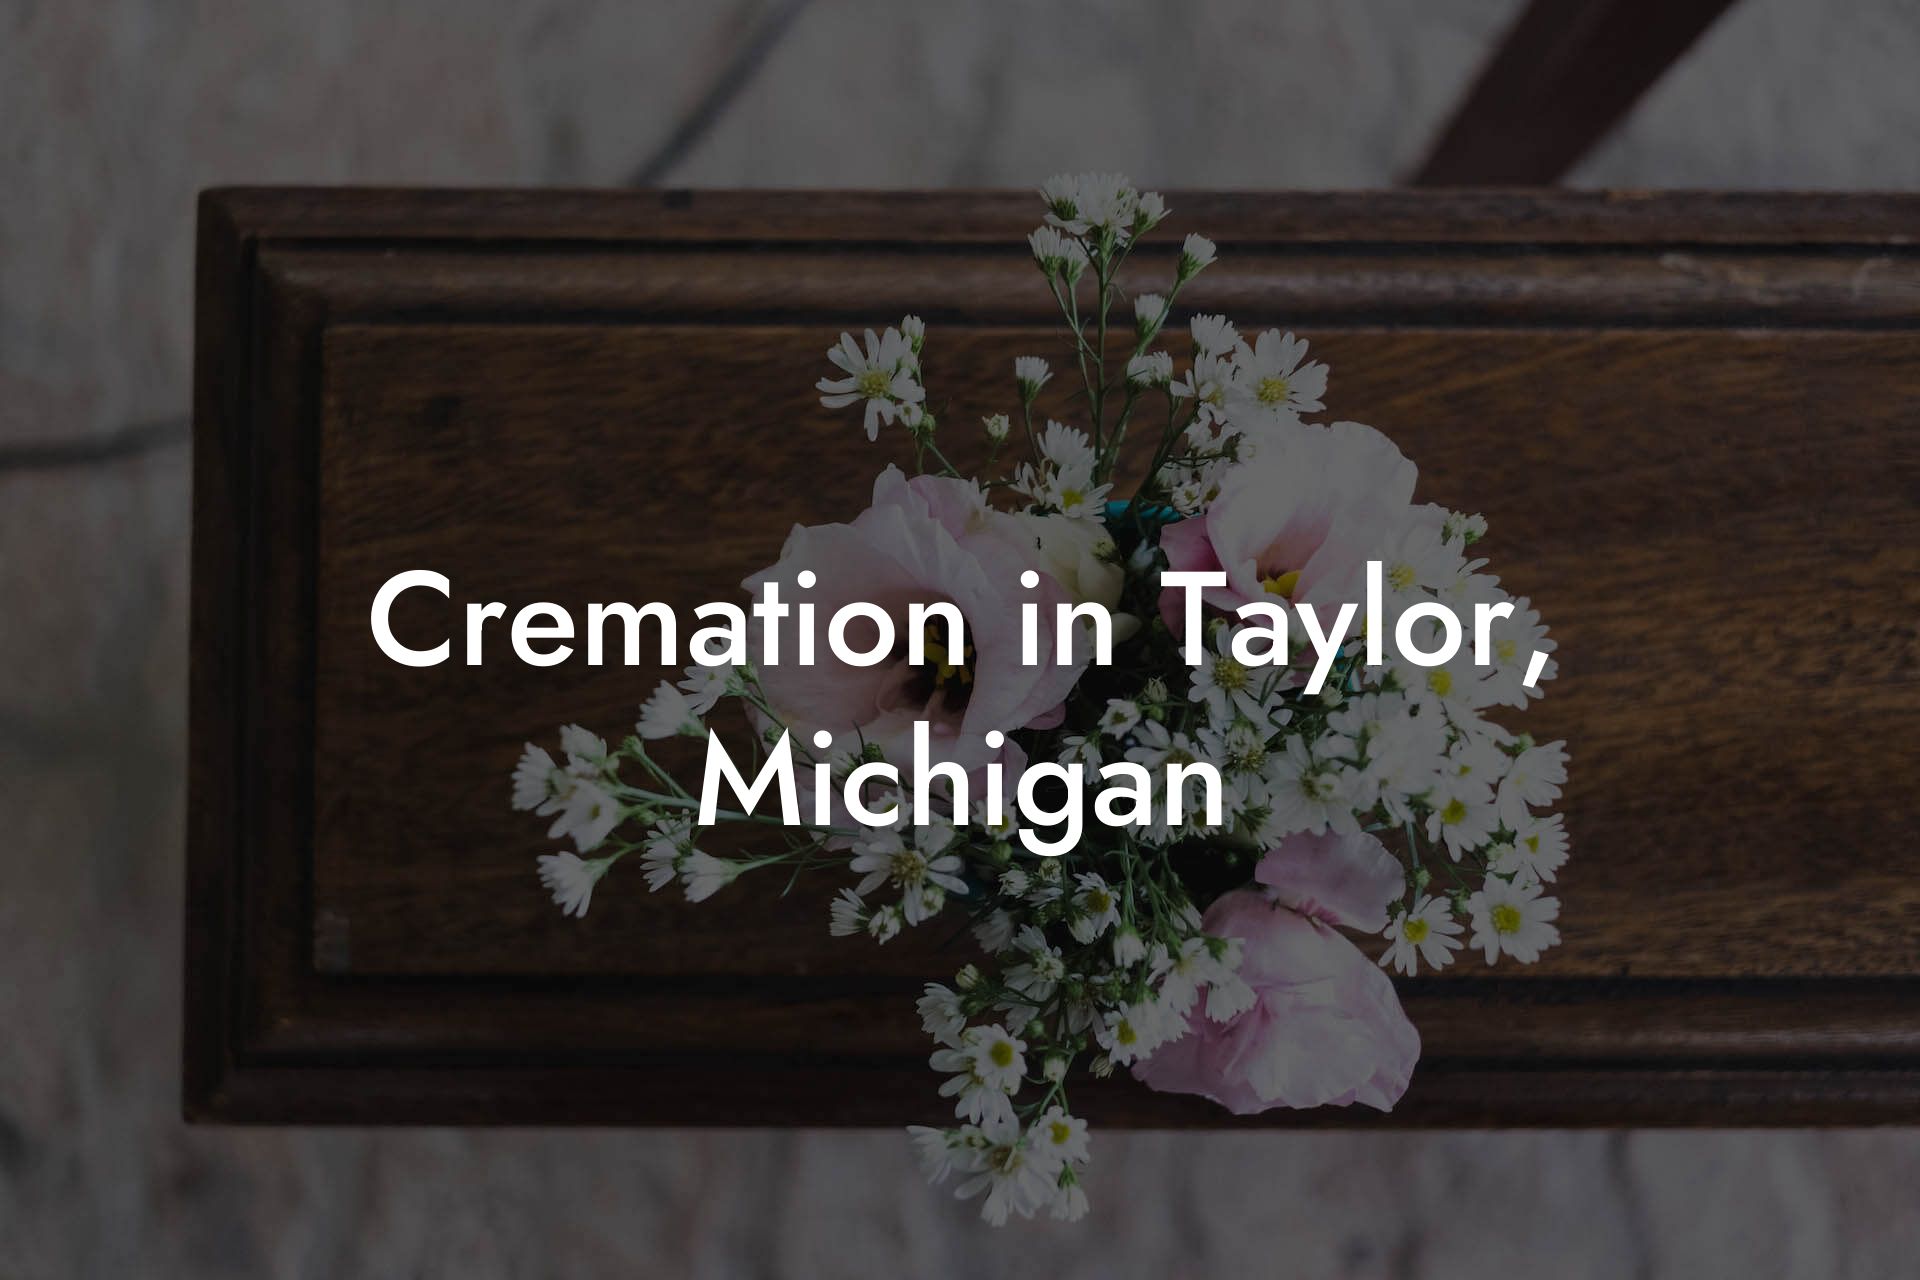 Cremation in Taylor, Michigan